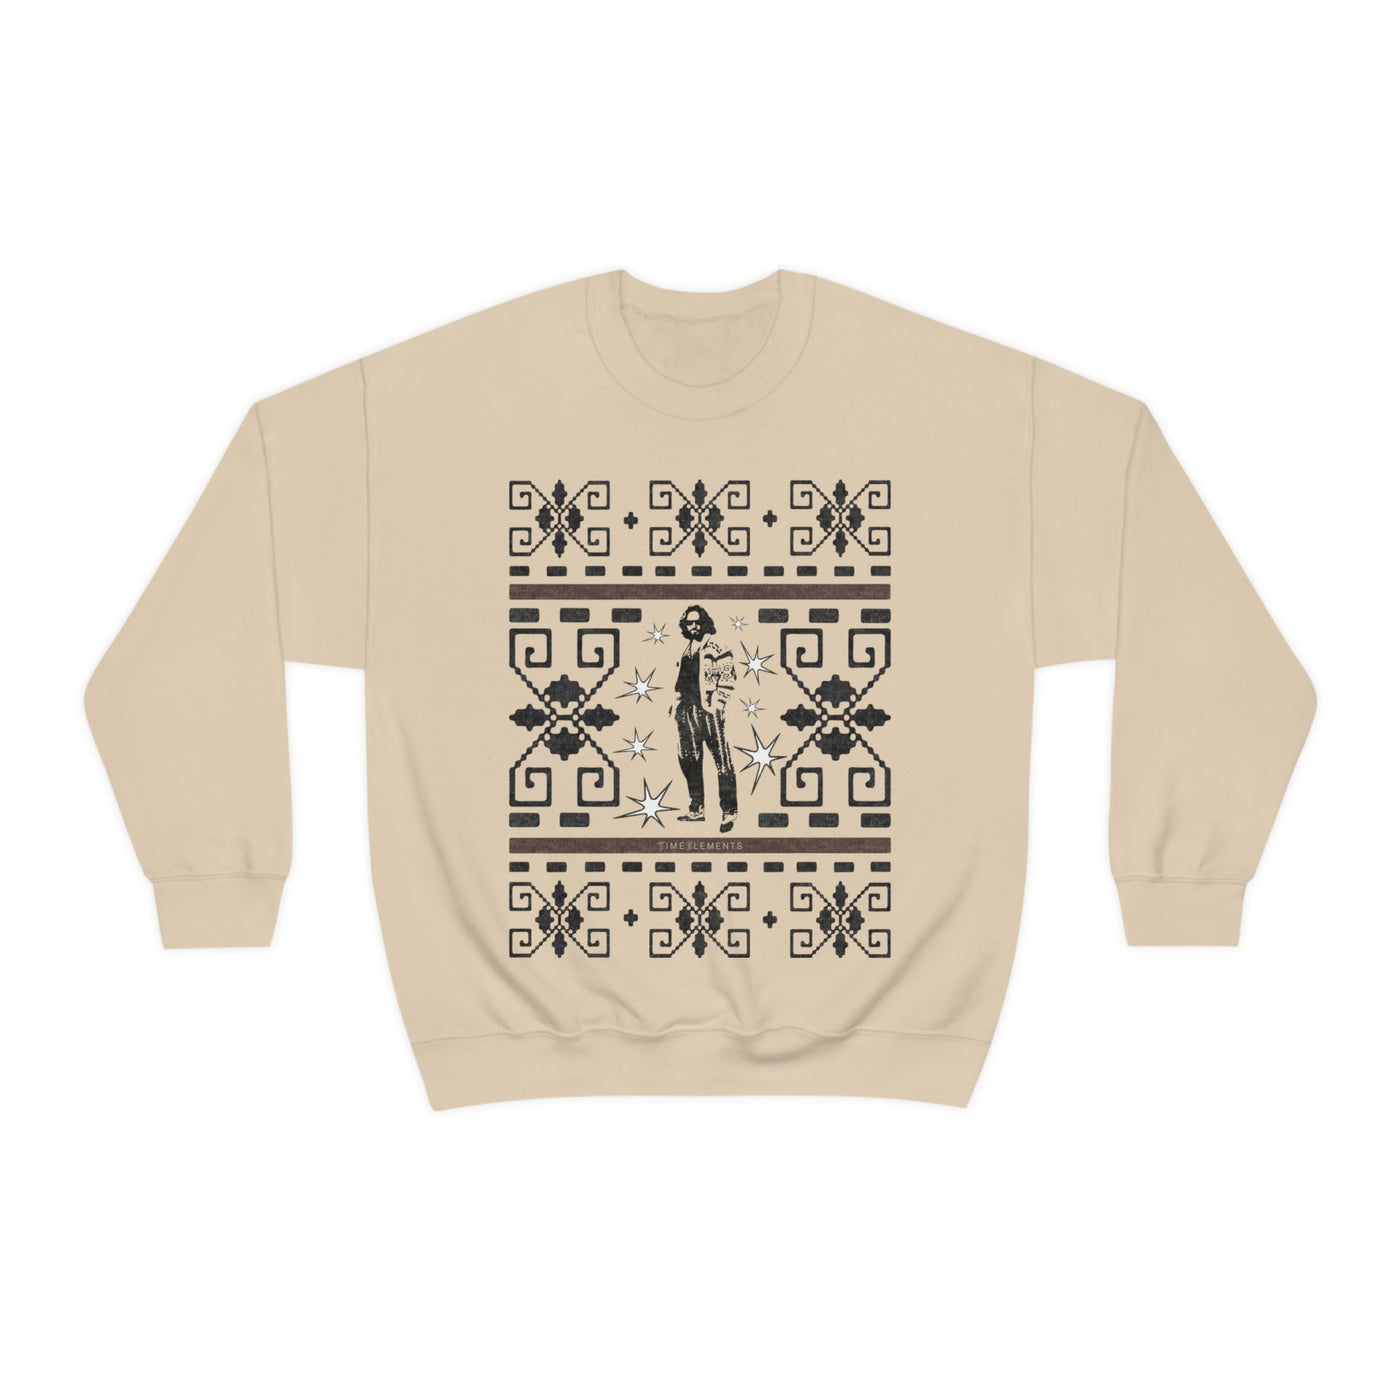 The Dude's Sweatshirt with The Iconic Lebowski Sweater Pattern and The Dude's Silhouette